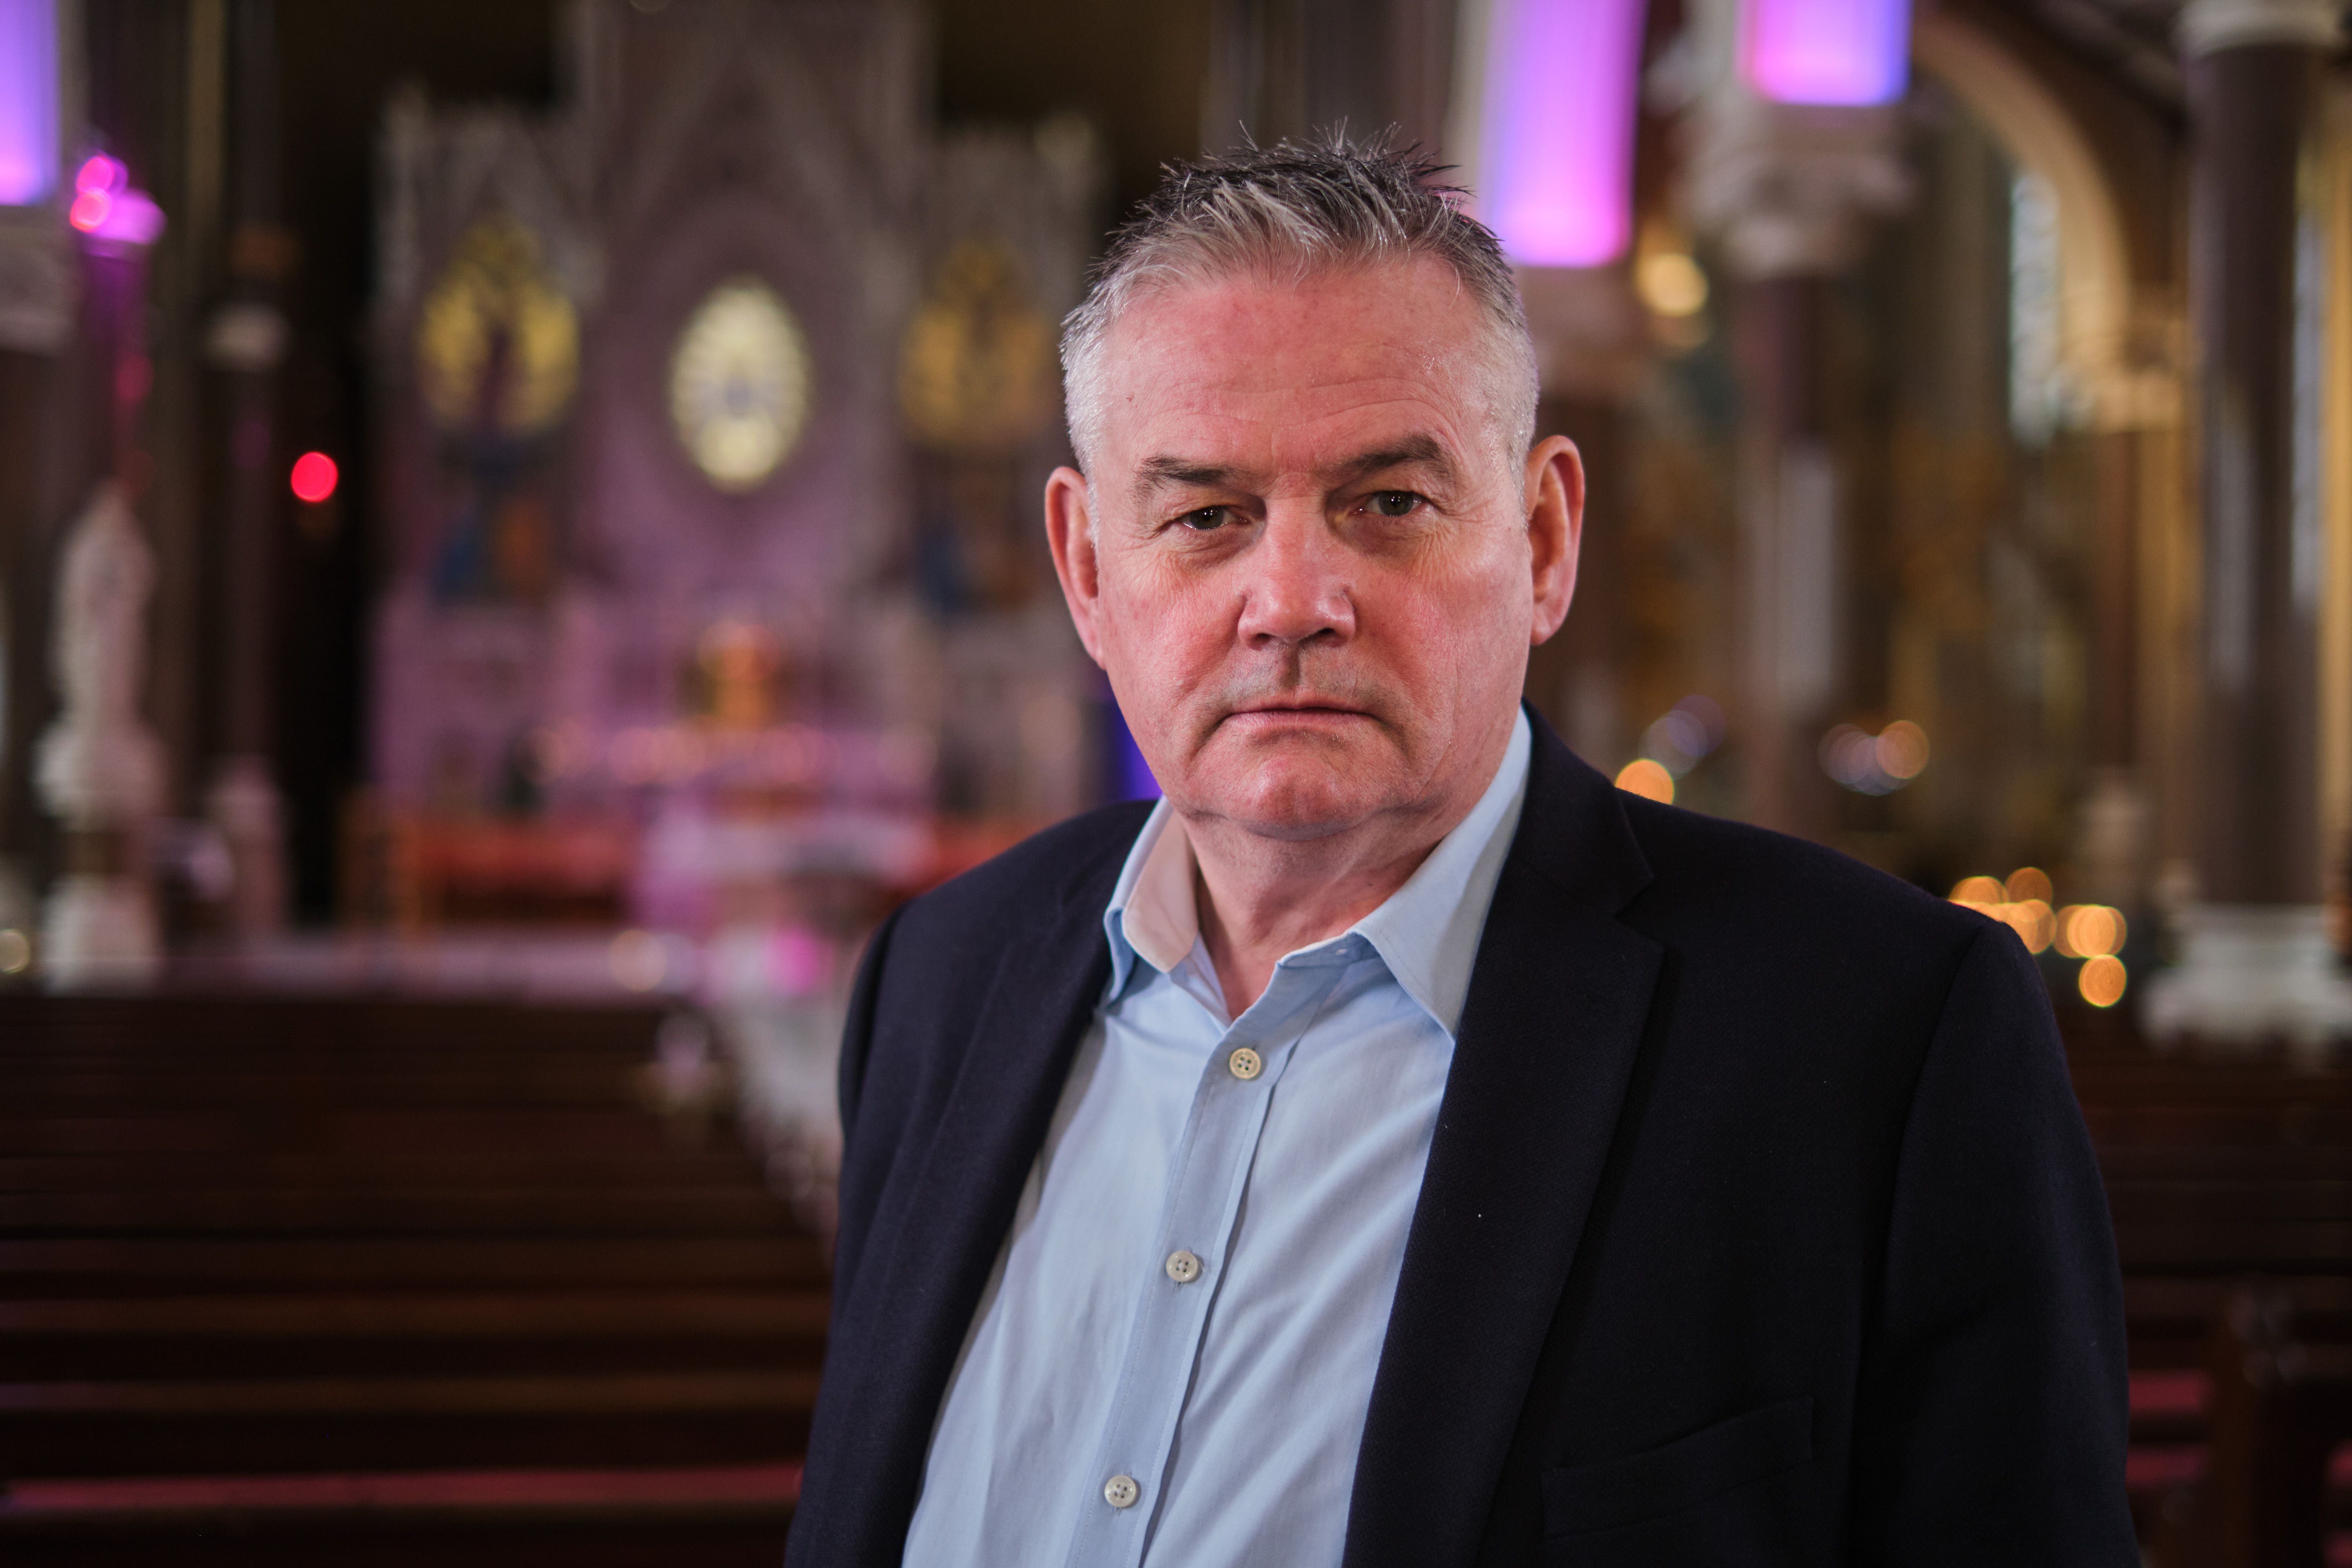 INVESTIGATION: Journalist Kevin Magee embarks on a journey this Sunday